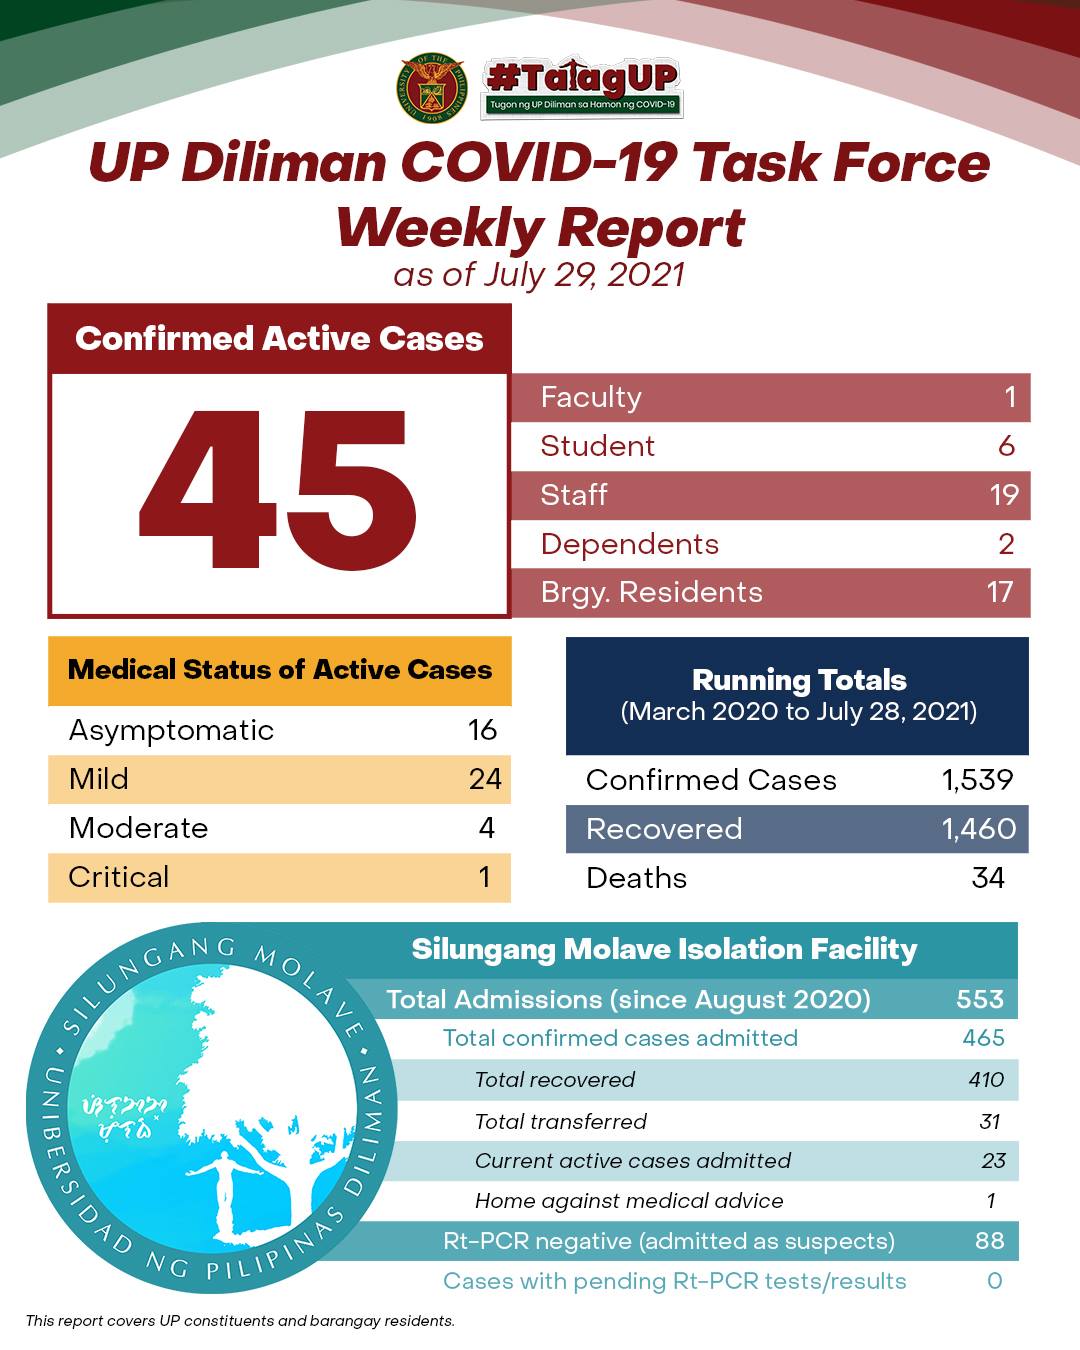 UP Diliman COVID-19 Task Force Weekly Report as of July 29, 2021